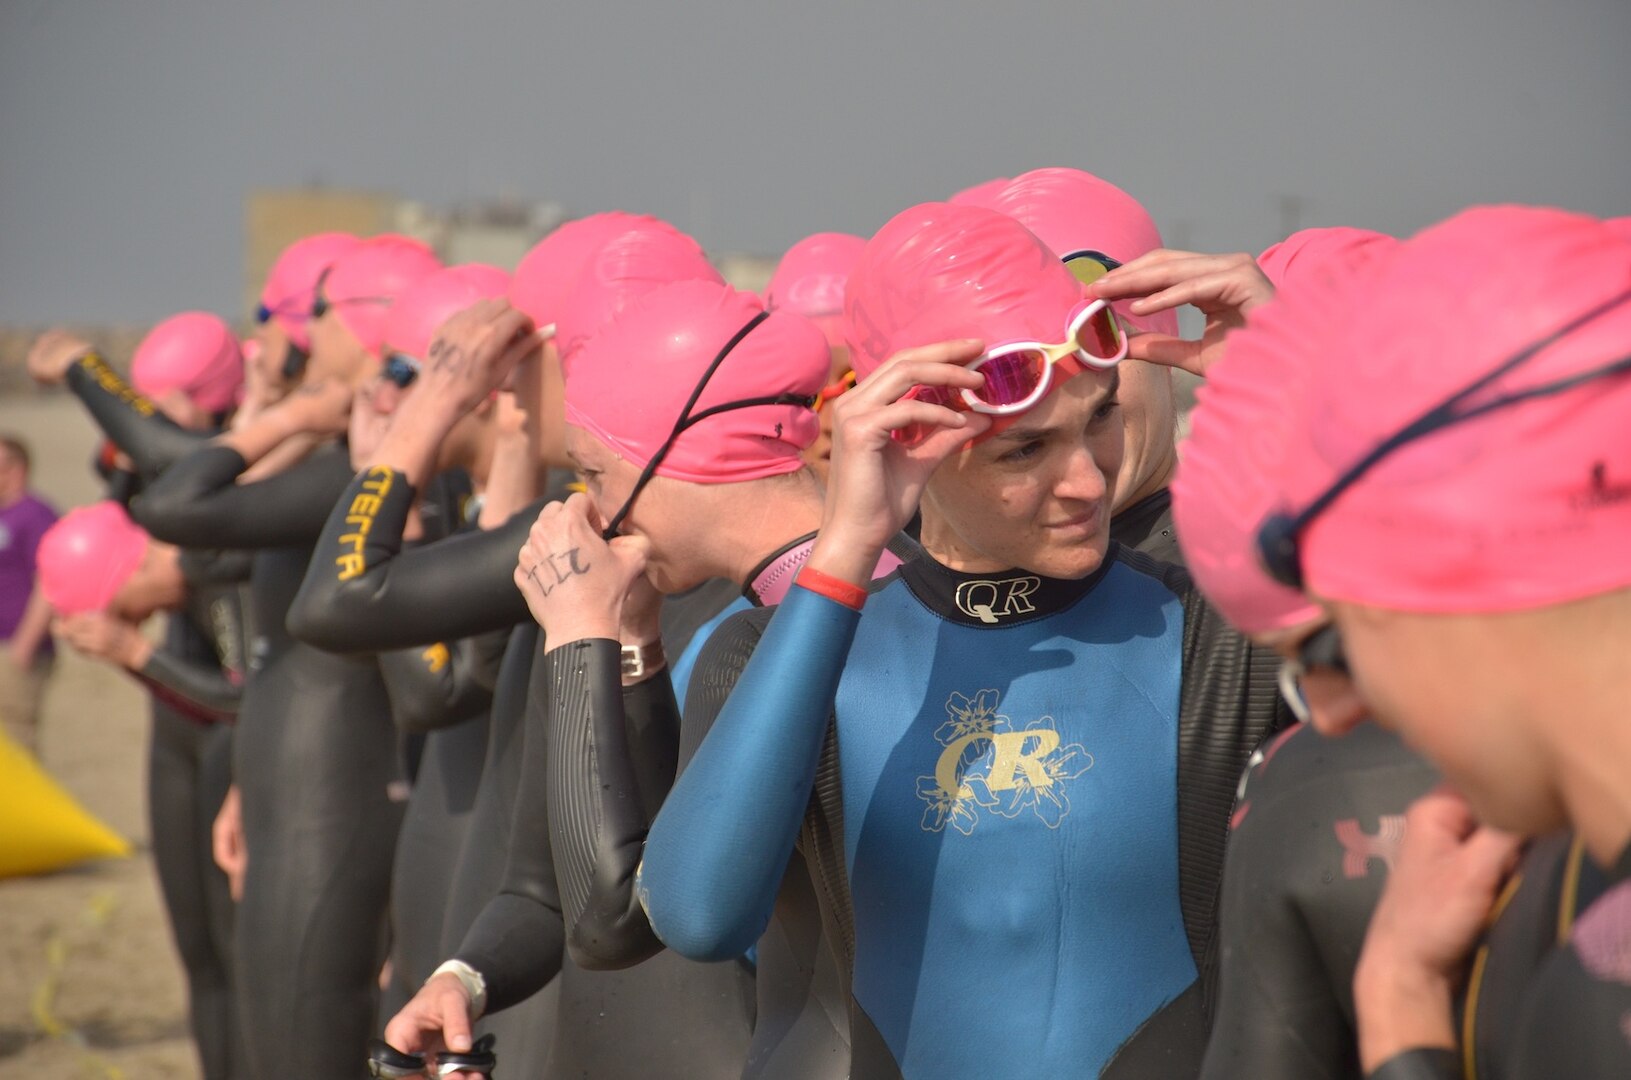 Women Service members from across the Armed Forces line up ready to jump in the Pacific Ocean off the coast of NBVC Point Mugu, CA for the start of the 2013 Armed Forces Triathlon Championship.